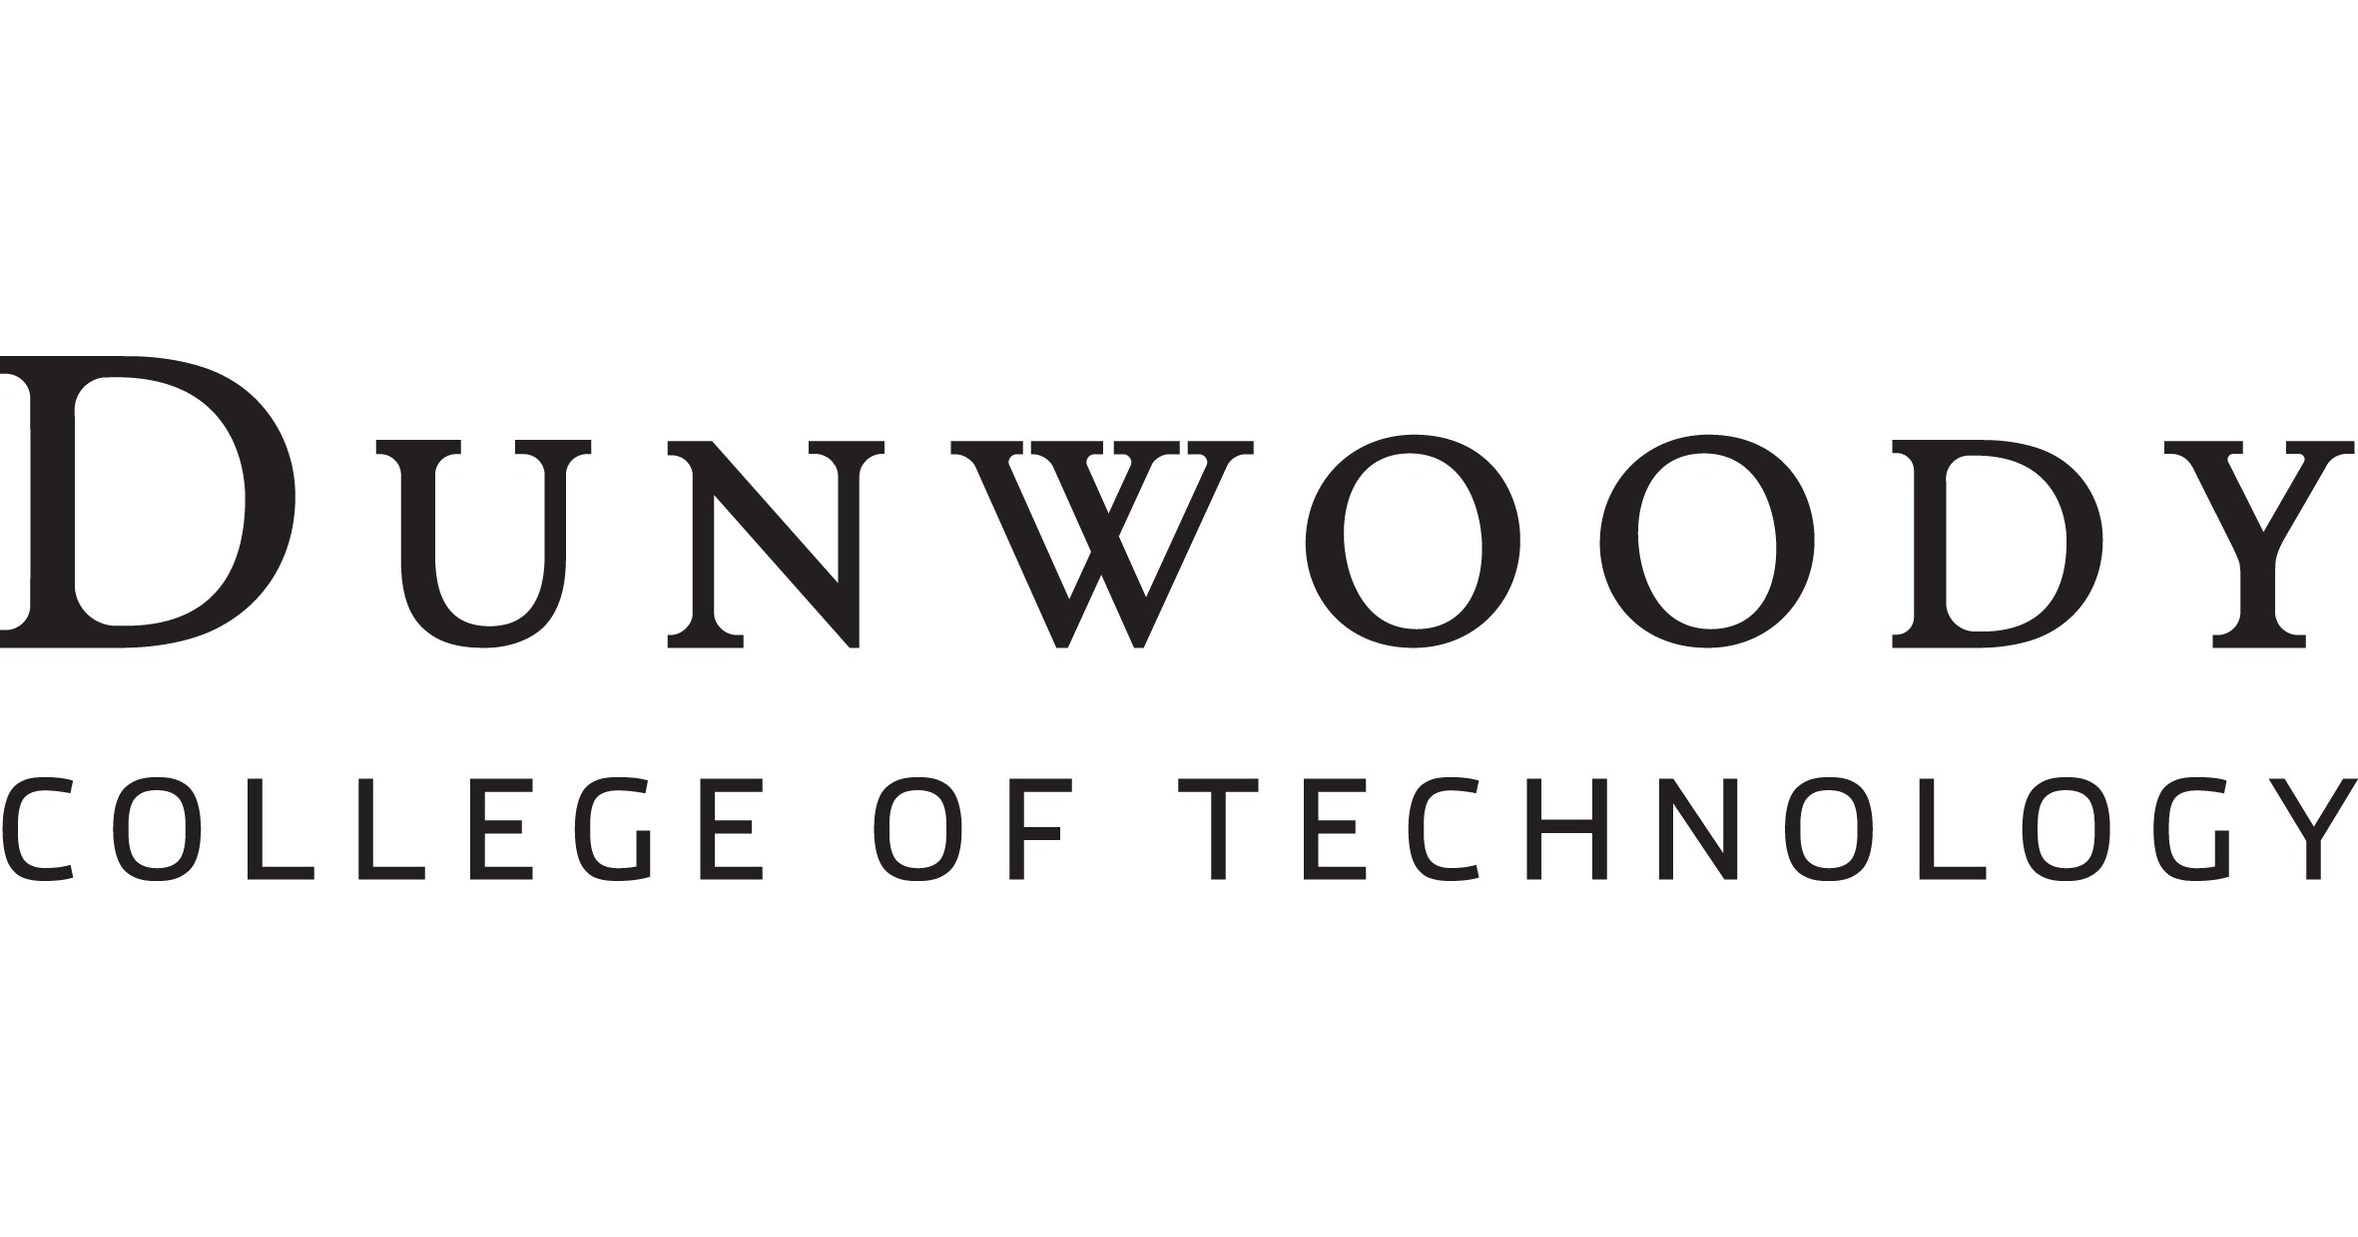 Dunwoody College of Technology Adds Bachelor of Science in Computer Engineering